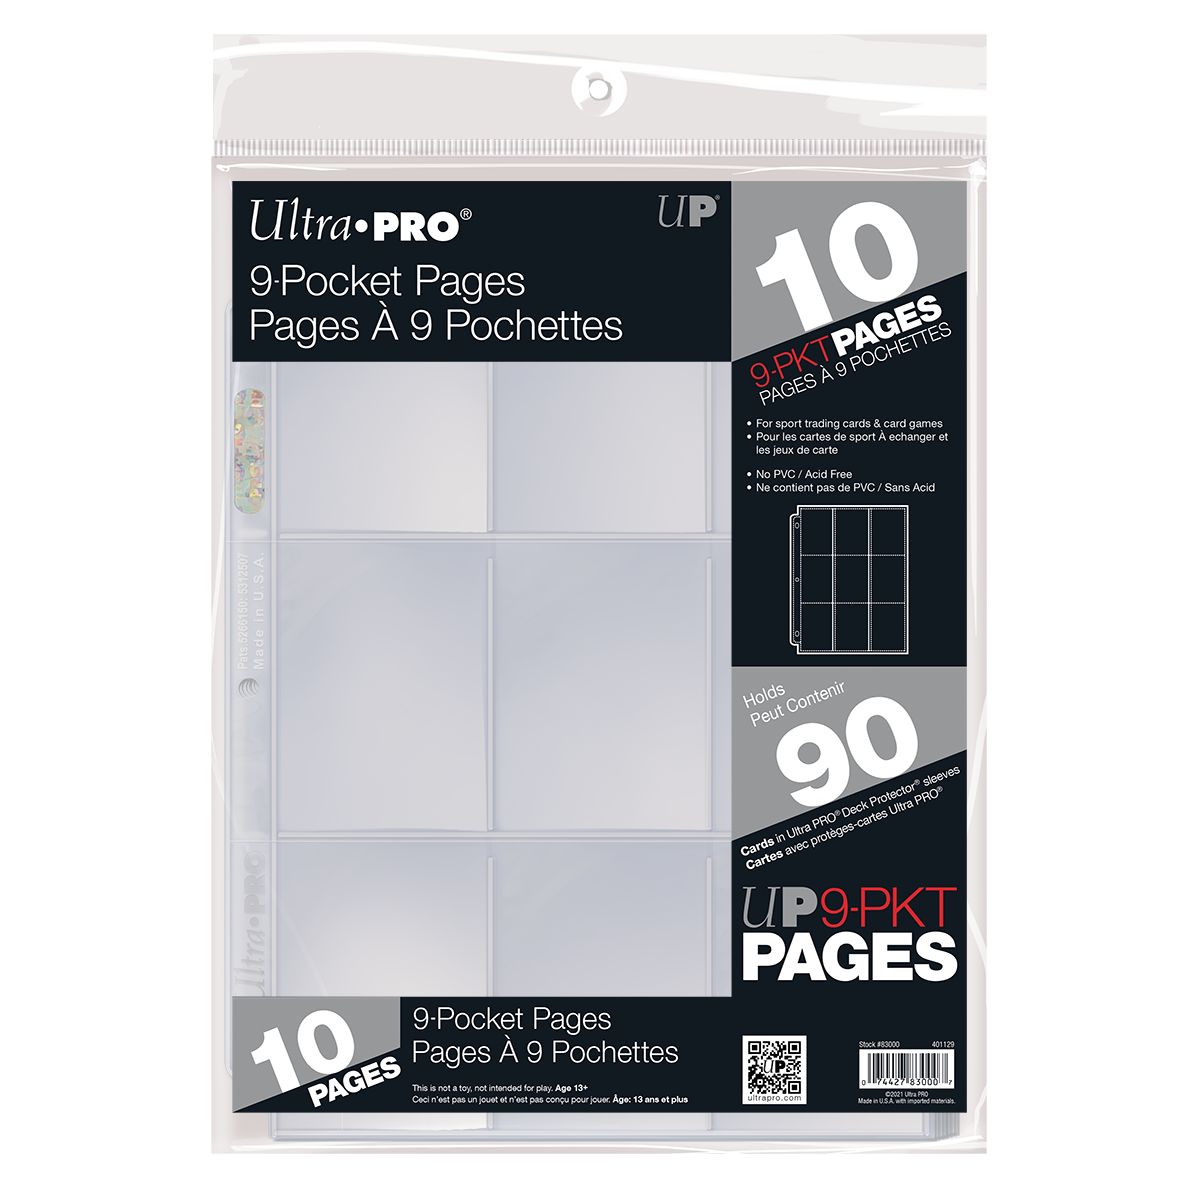 Persona con experiencia violín tambor 9-Pocket Pages (10ct) for Standard Size Cards | Ultra PRO International